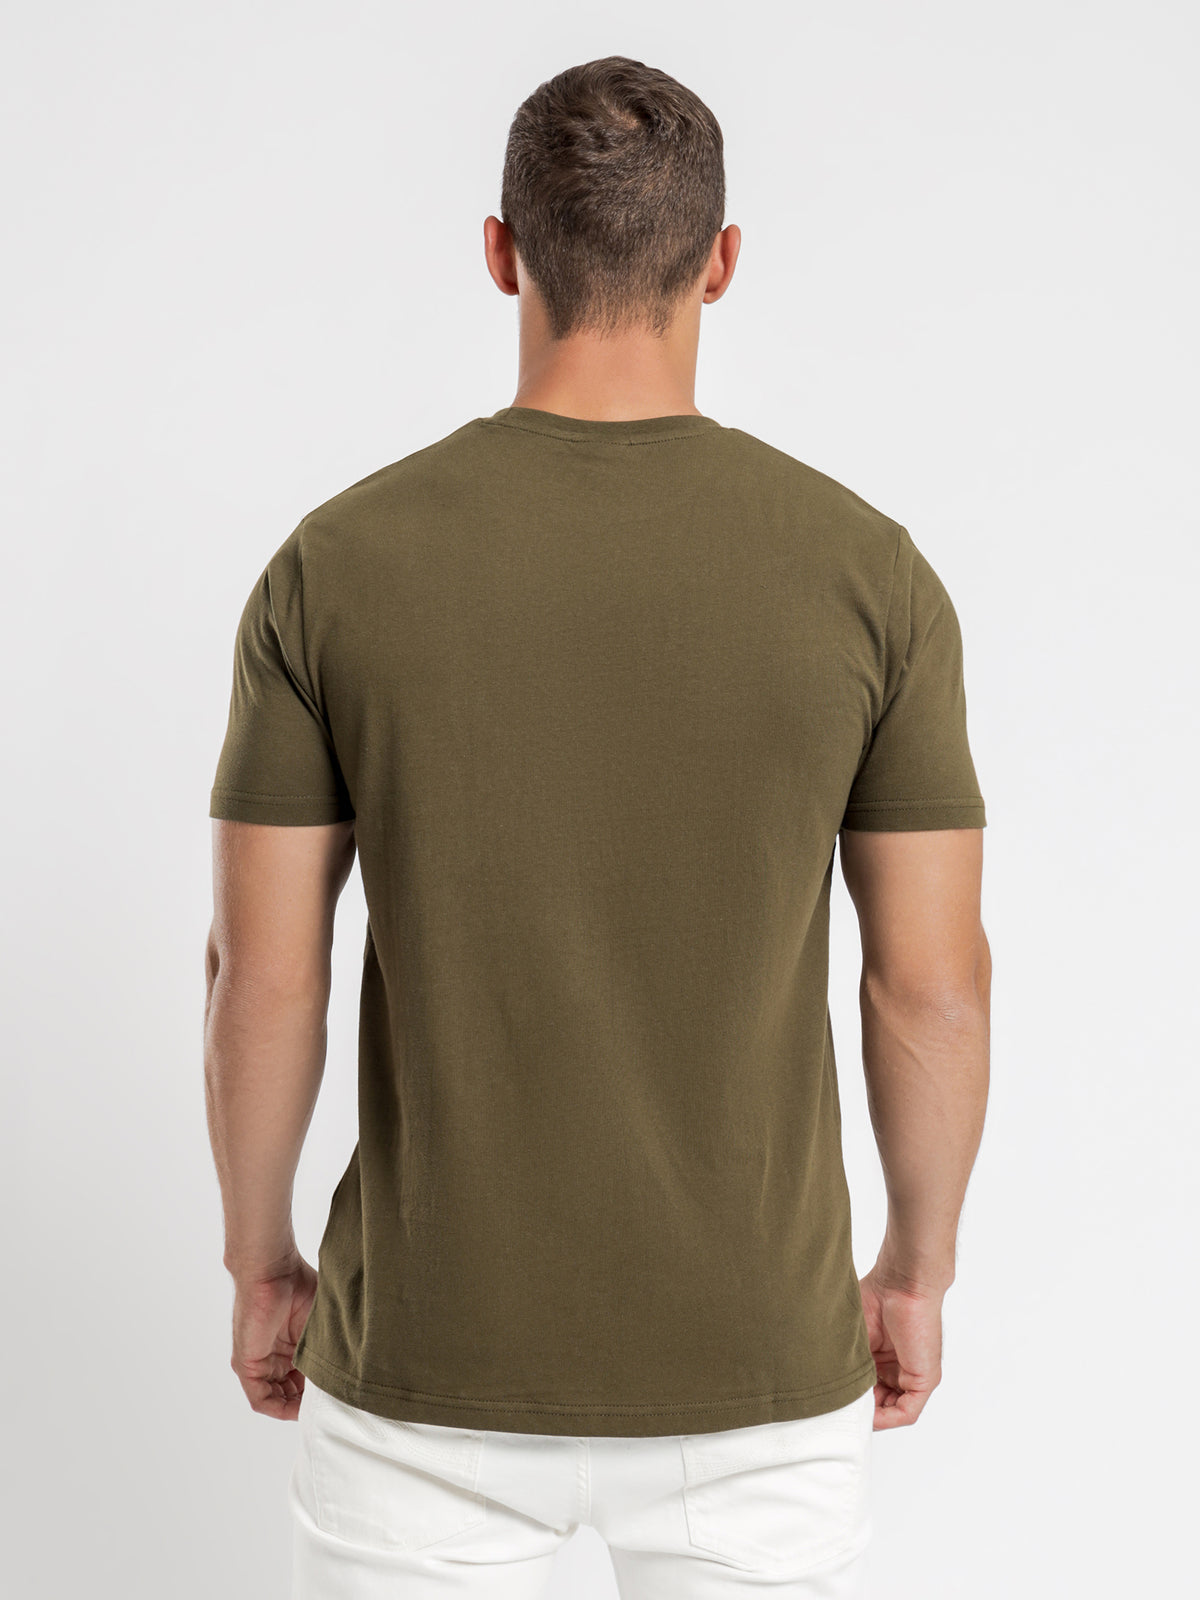 Canaletto T-Shirt in Khaki Green